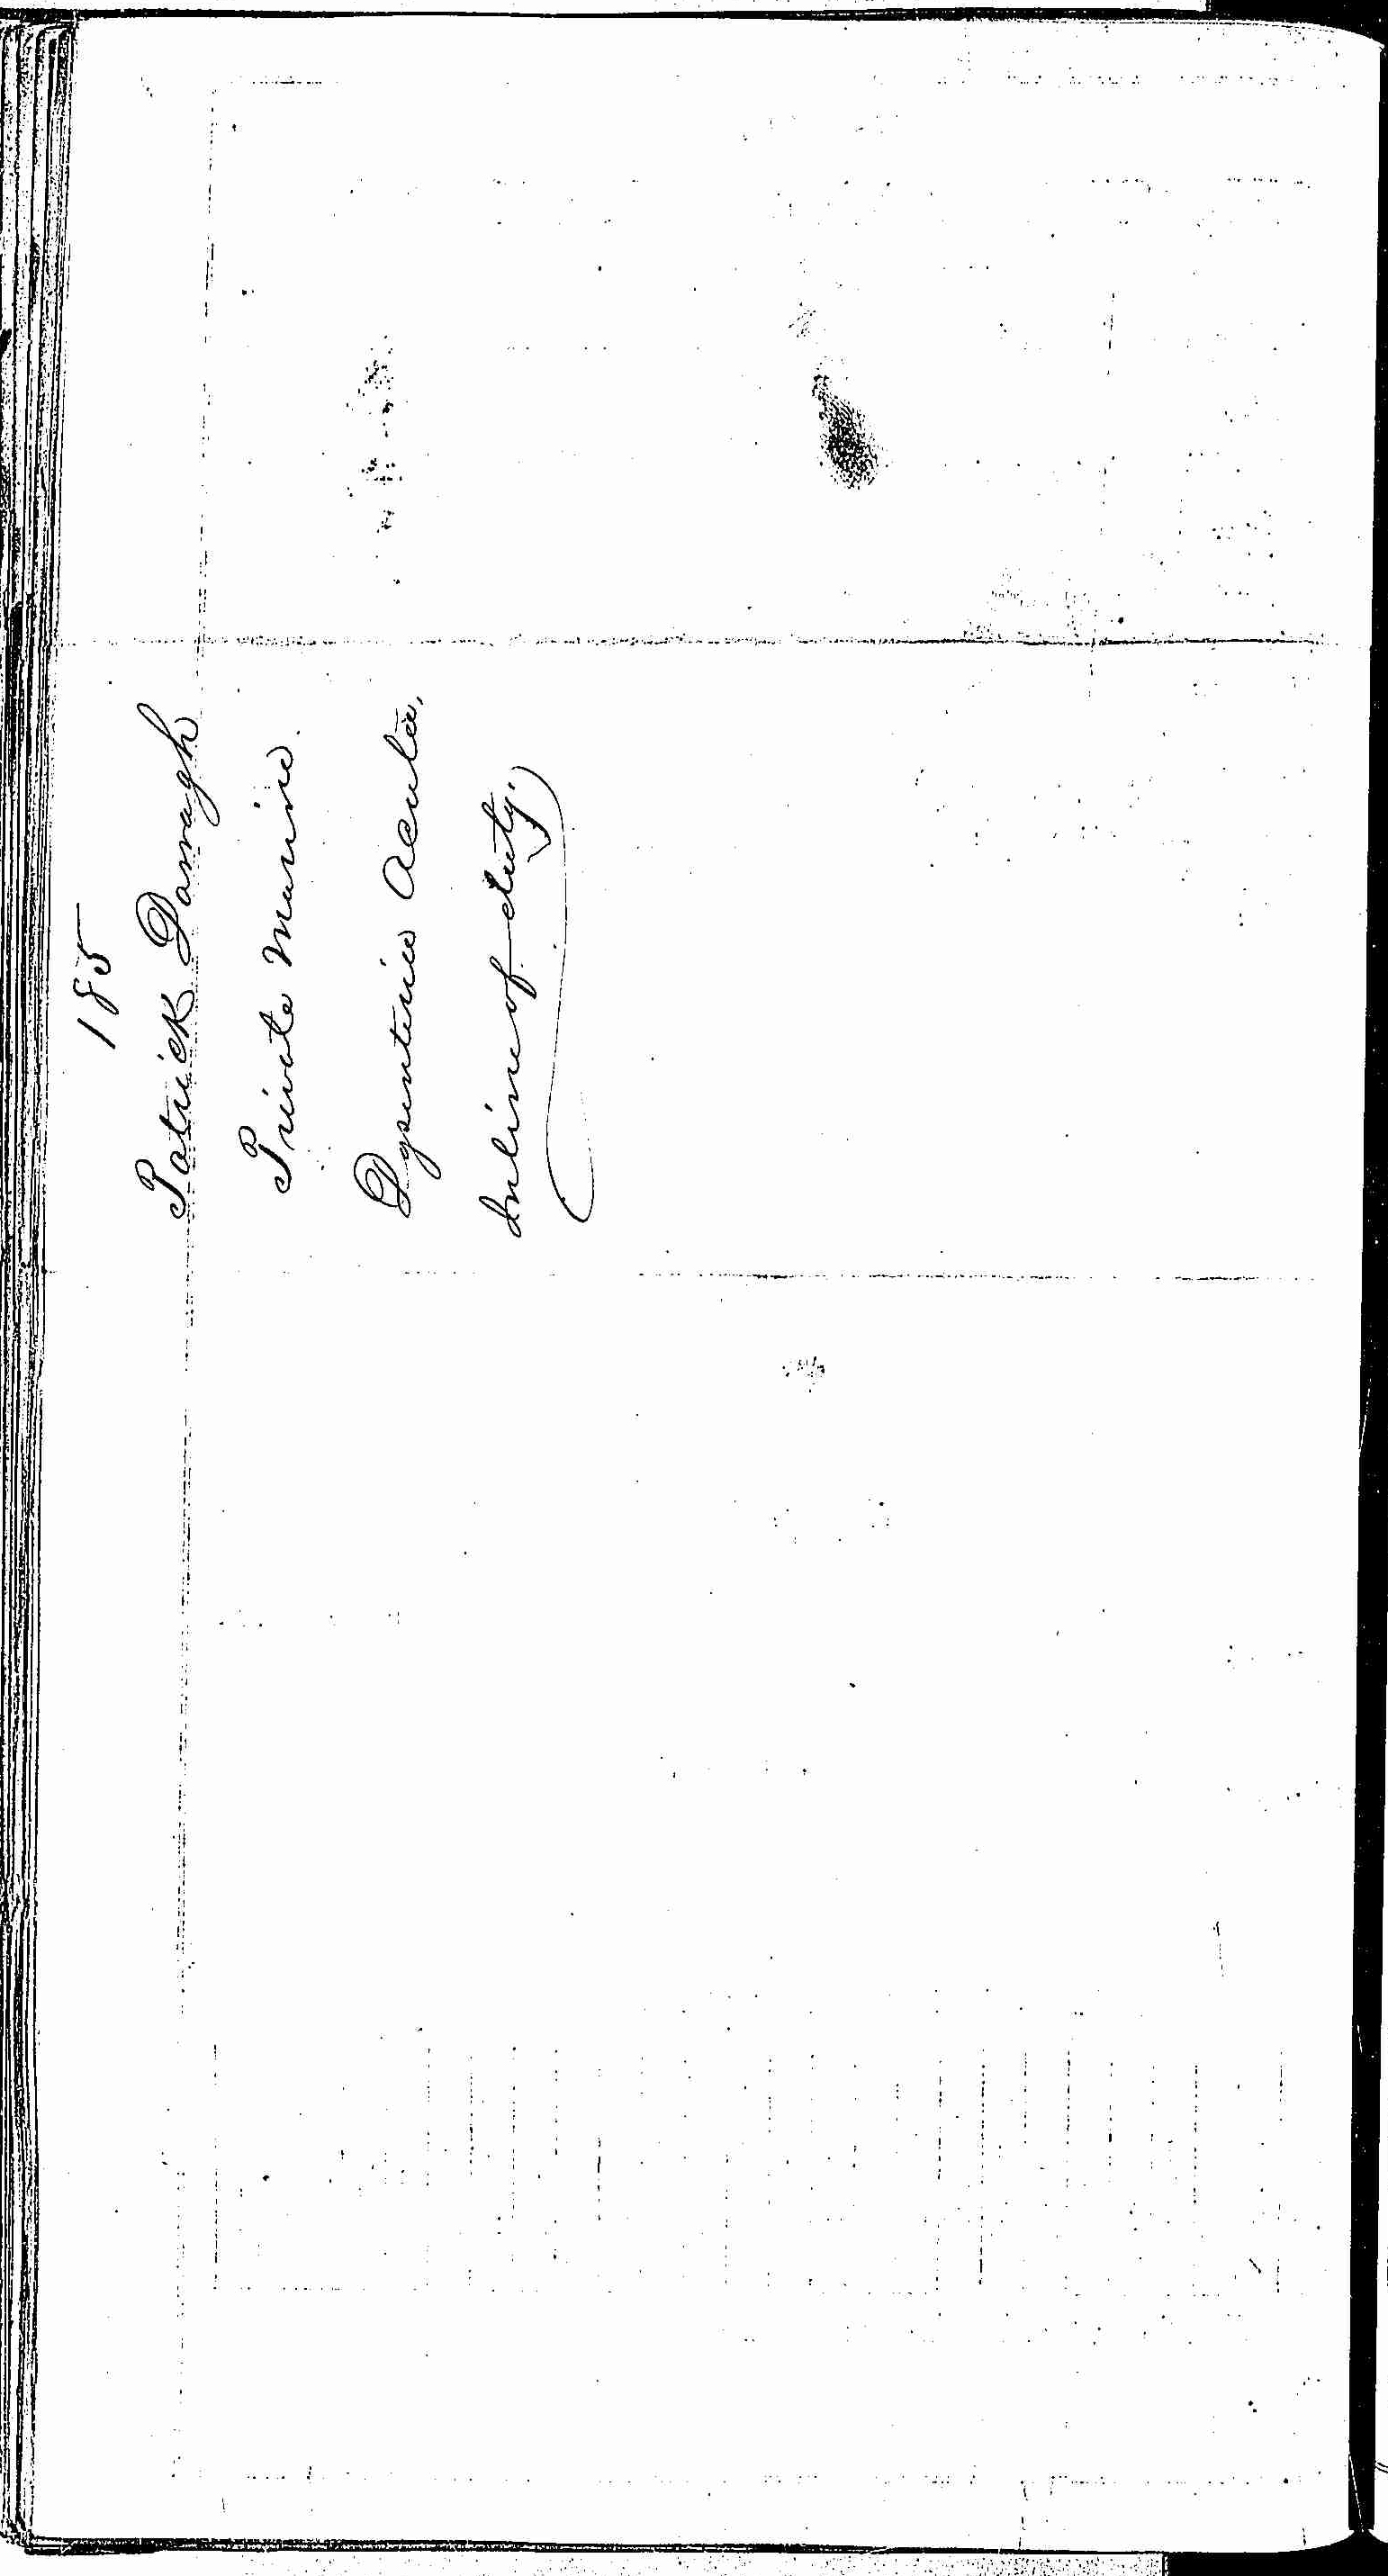 Entry for Patrick Darragh (page 2 of 2) in the log Hospital Tickets and Case Papers - Naval Hospital - Washington, D.C. - 1866-68